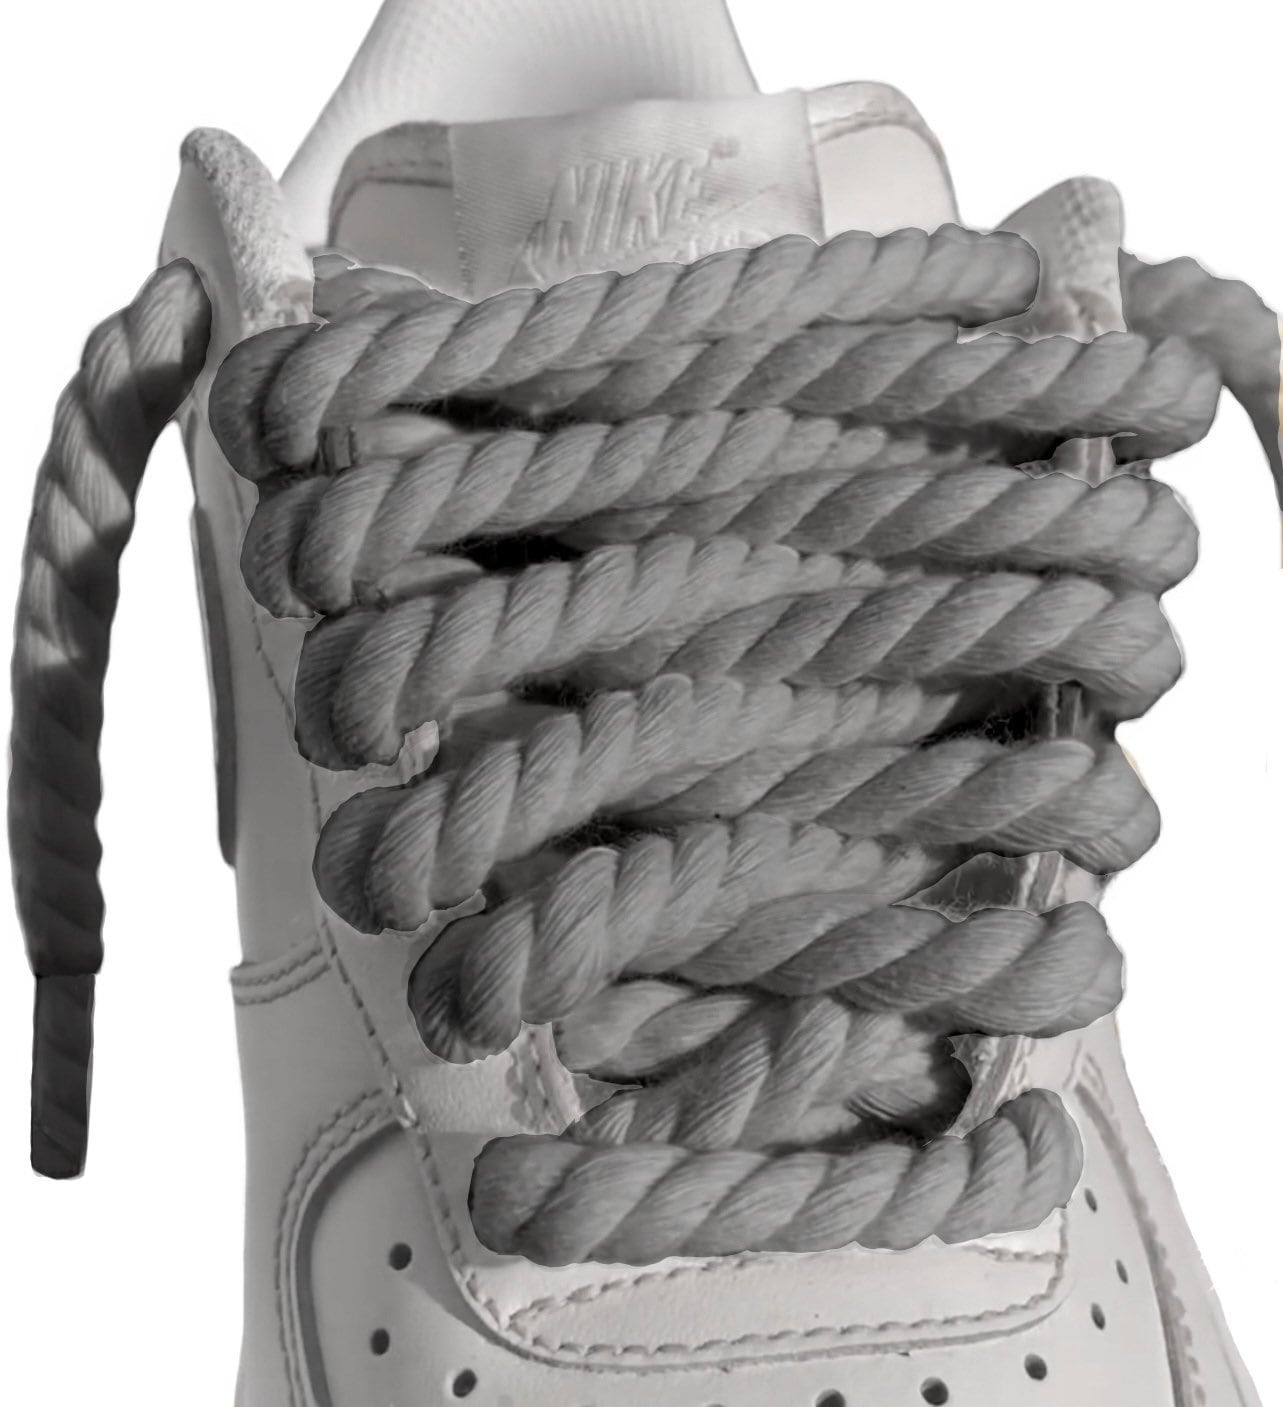 Super Chunky Thick Braided Rope AF1 Shoelaces for Air Force 1, Dunks,  Jordans & More -  Denmark